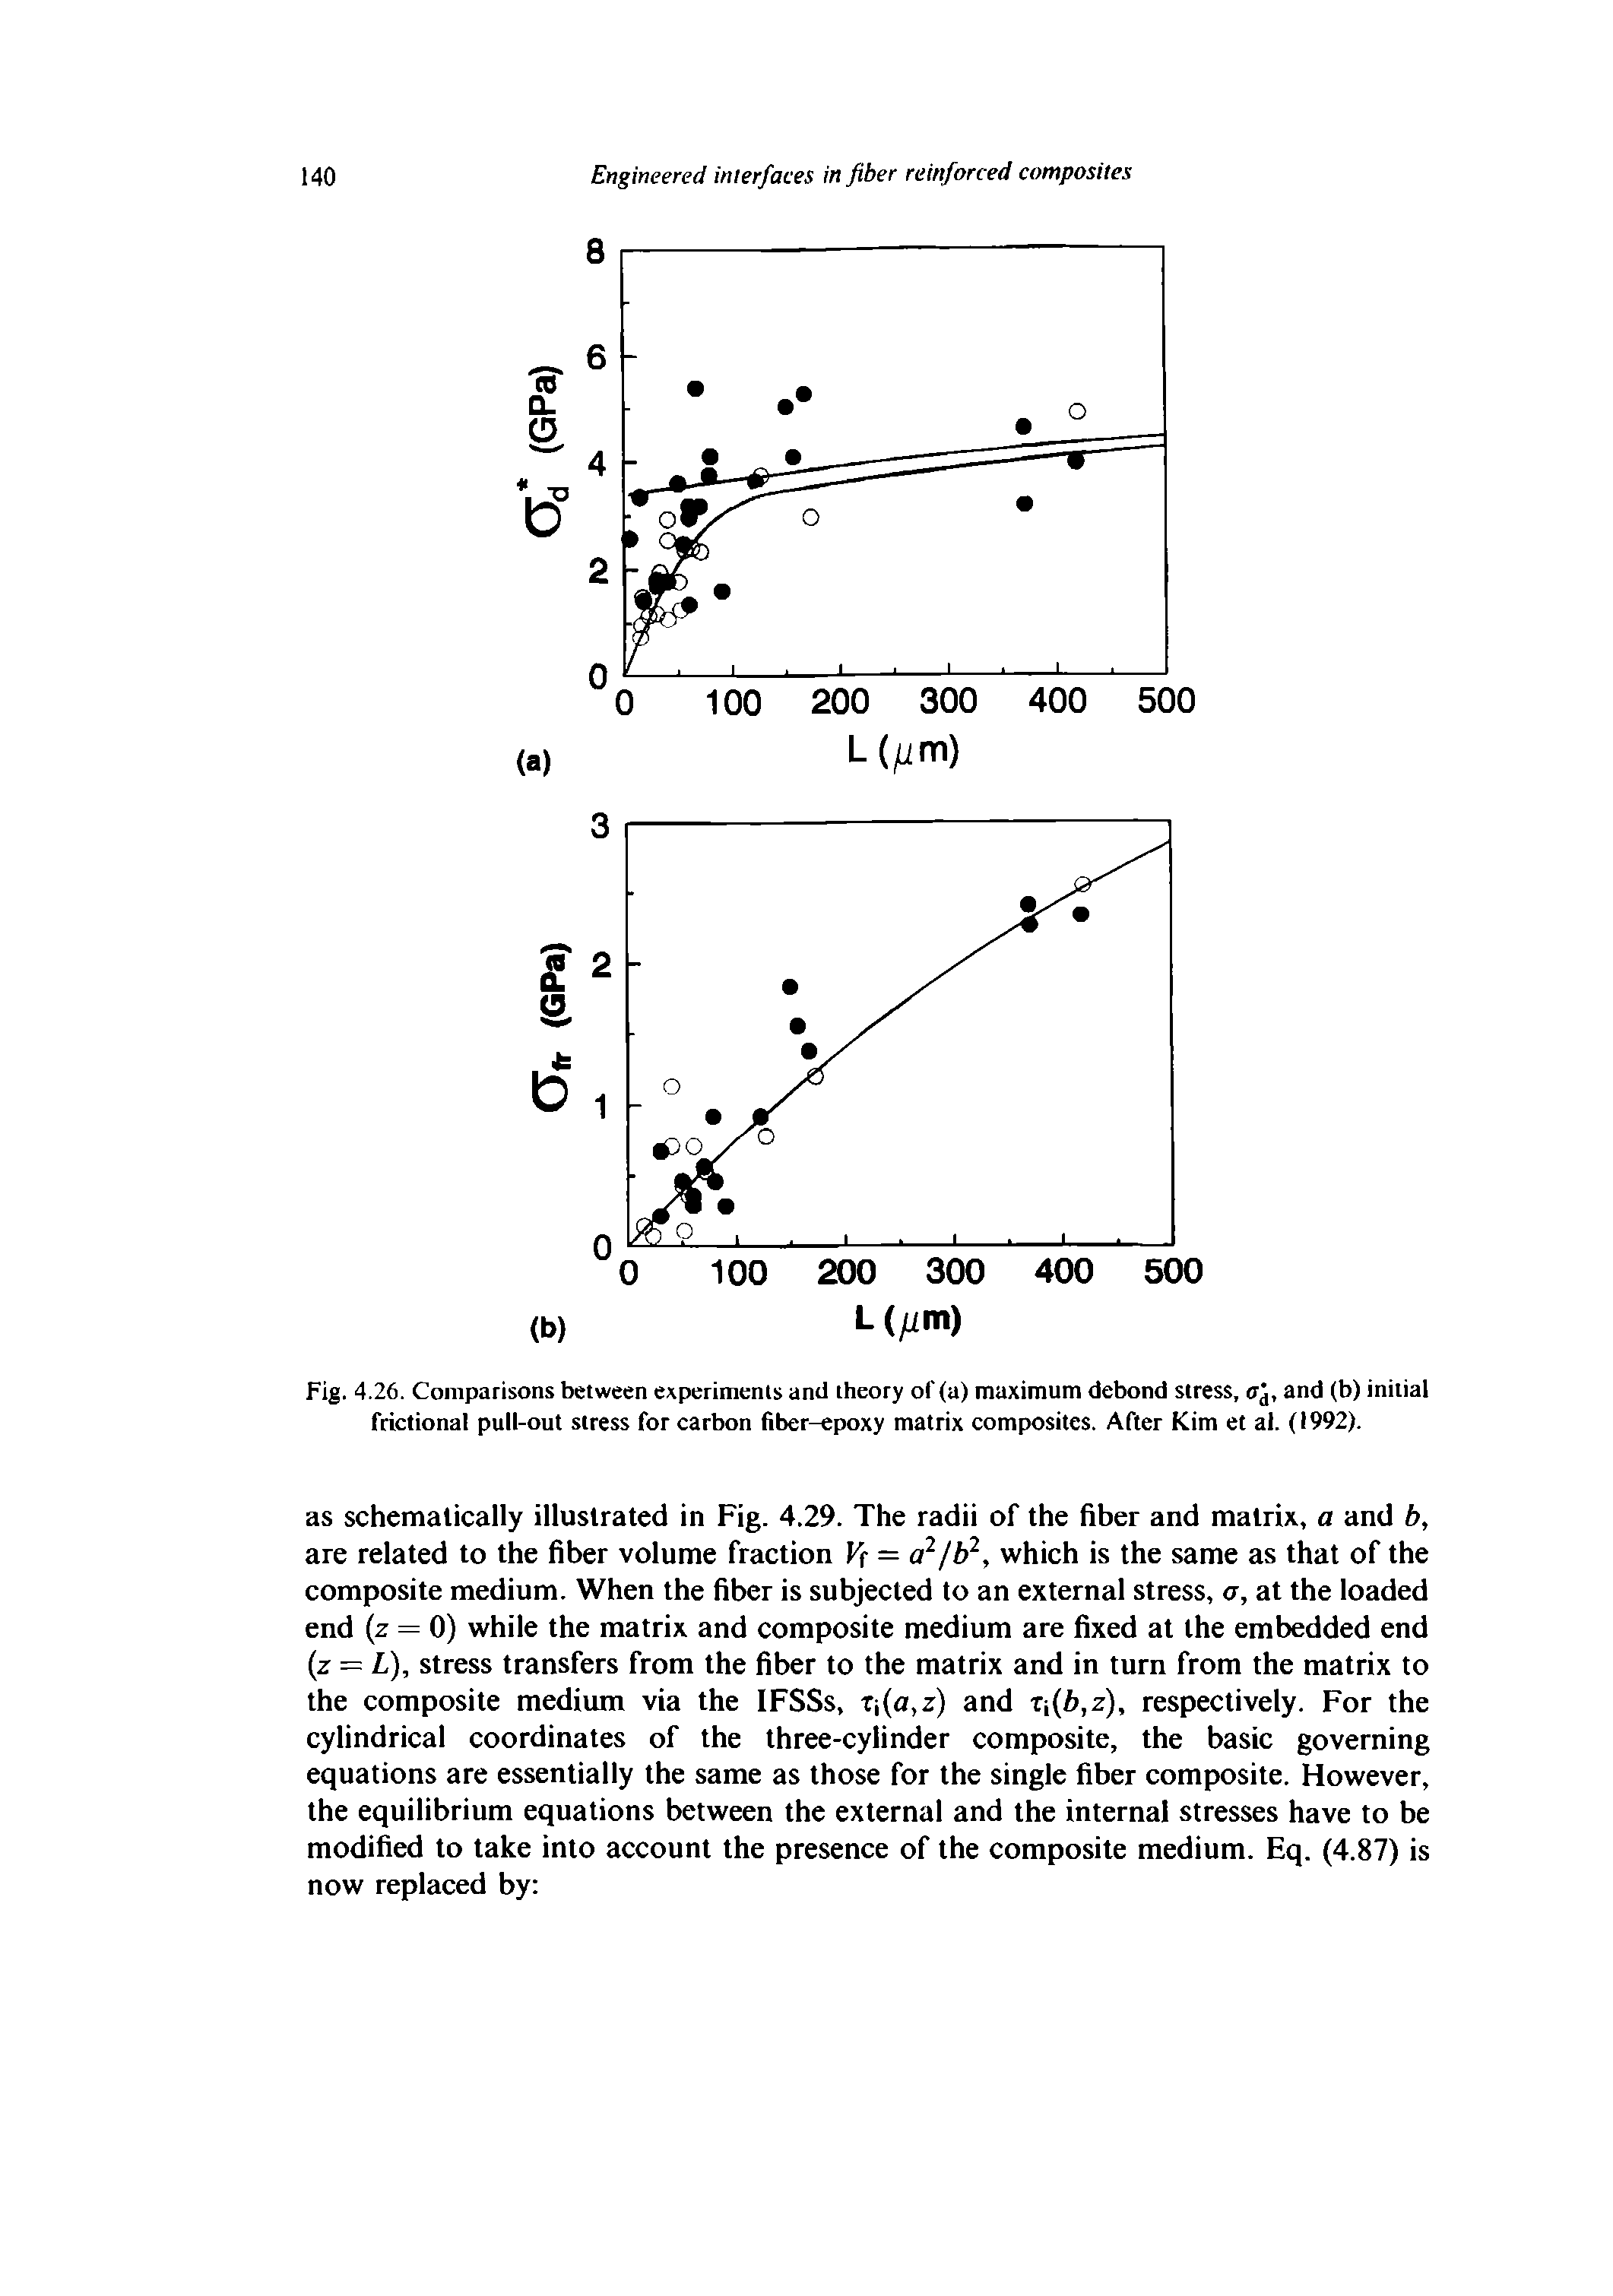 Fig. 4.26. Comparisons between experiments and theory of (a) maximum debond stress, trj, and (b) initial frictional pull-out stress for carbon fiber-epoxy matrix composites. After Kim et al. (1992).